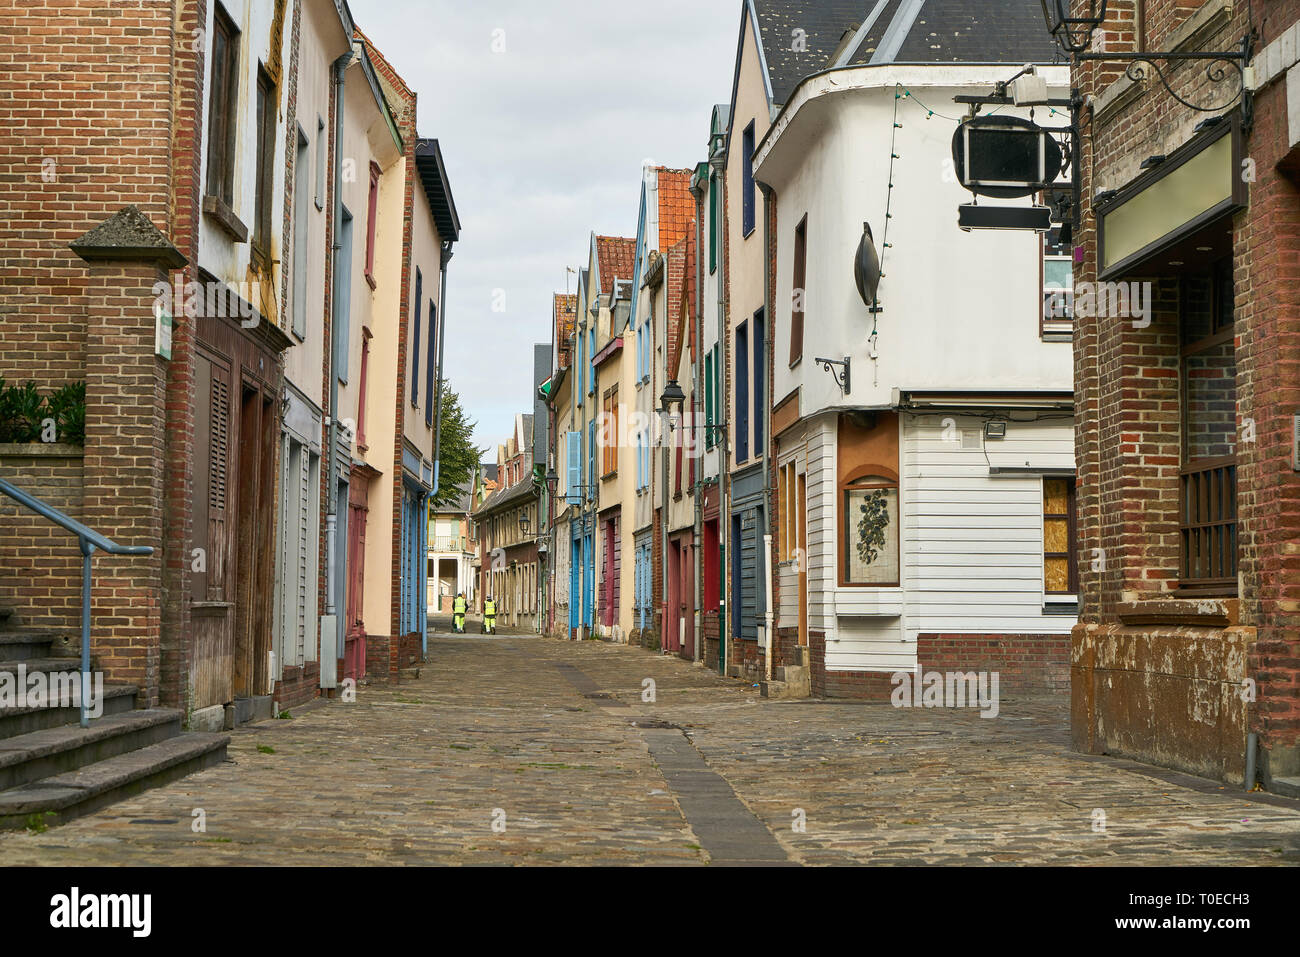 Narrow street with houses in the old town of Amiens, France Stock Photo